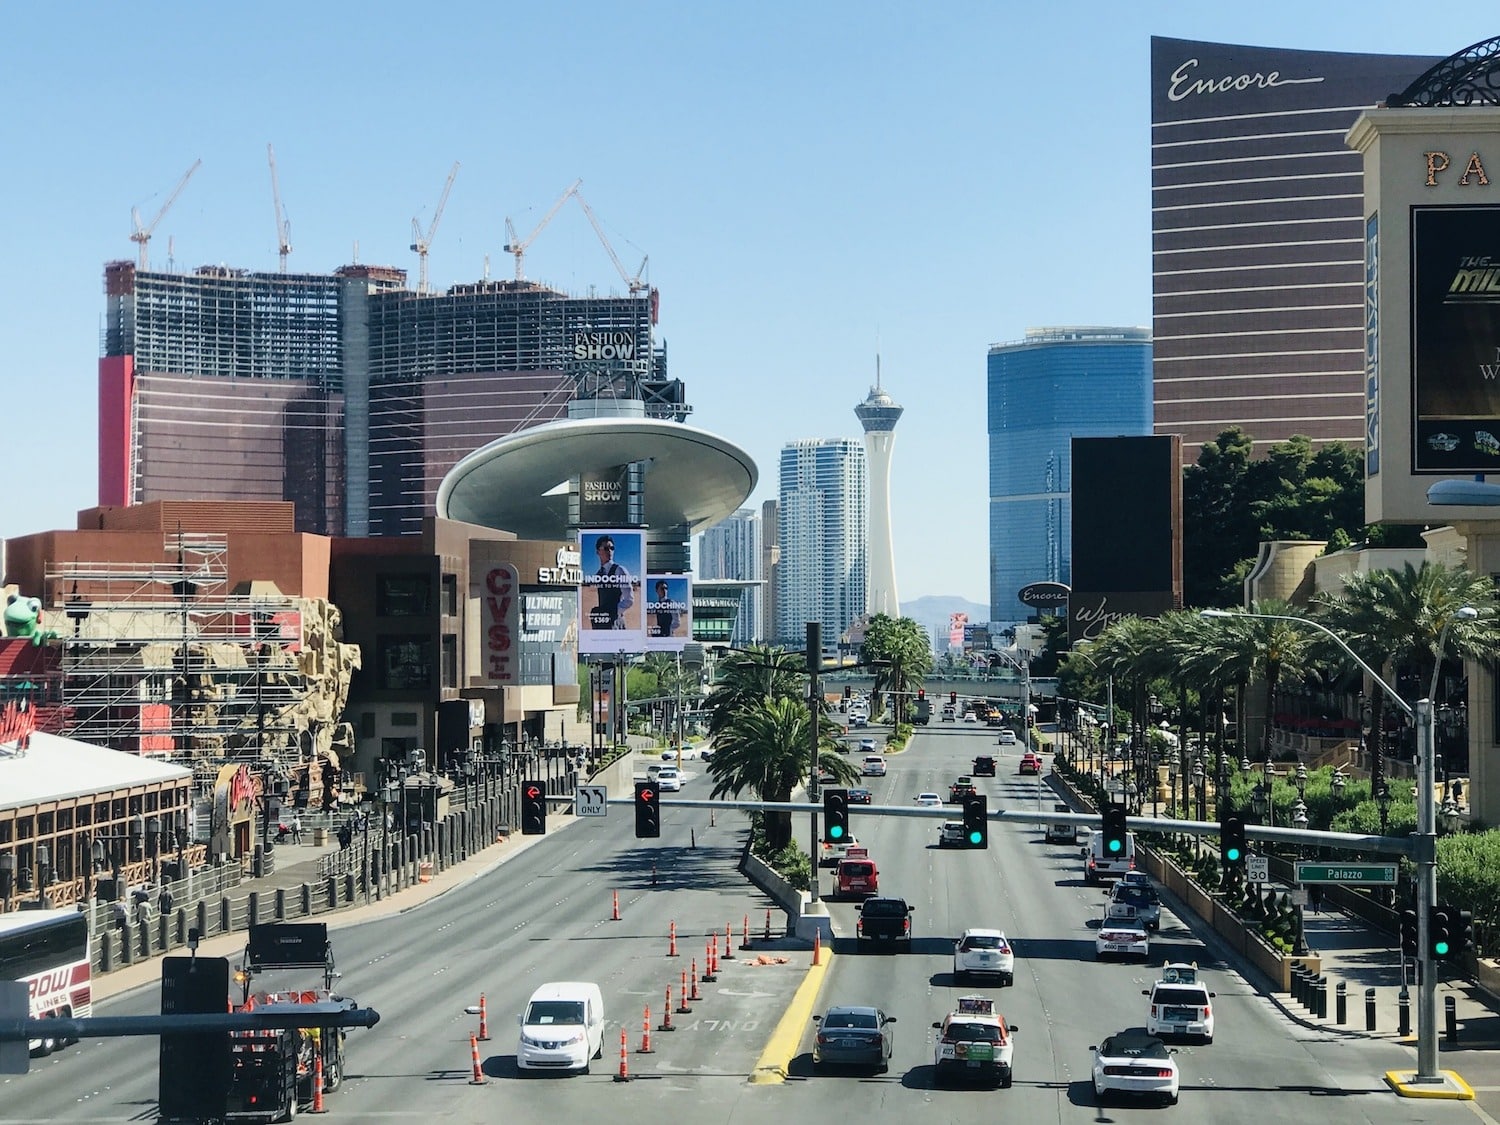 The Top 7 Hotels With Free Parking In Vegas